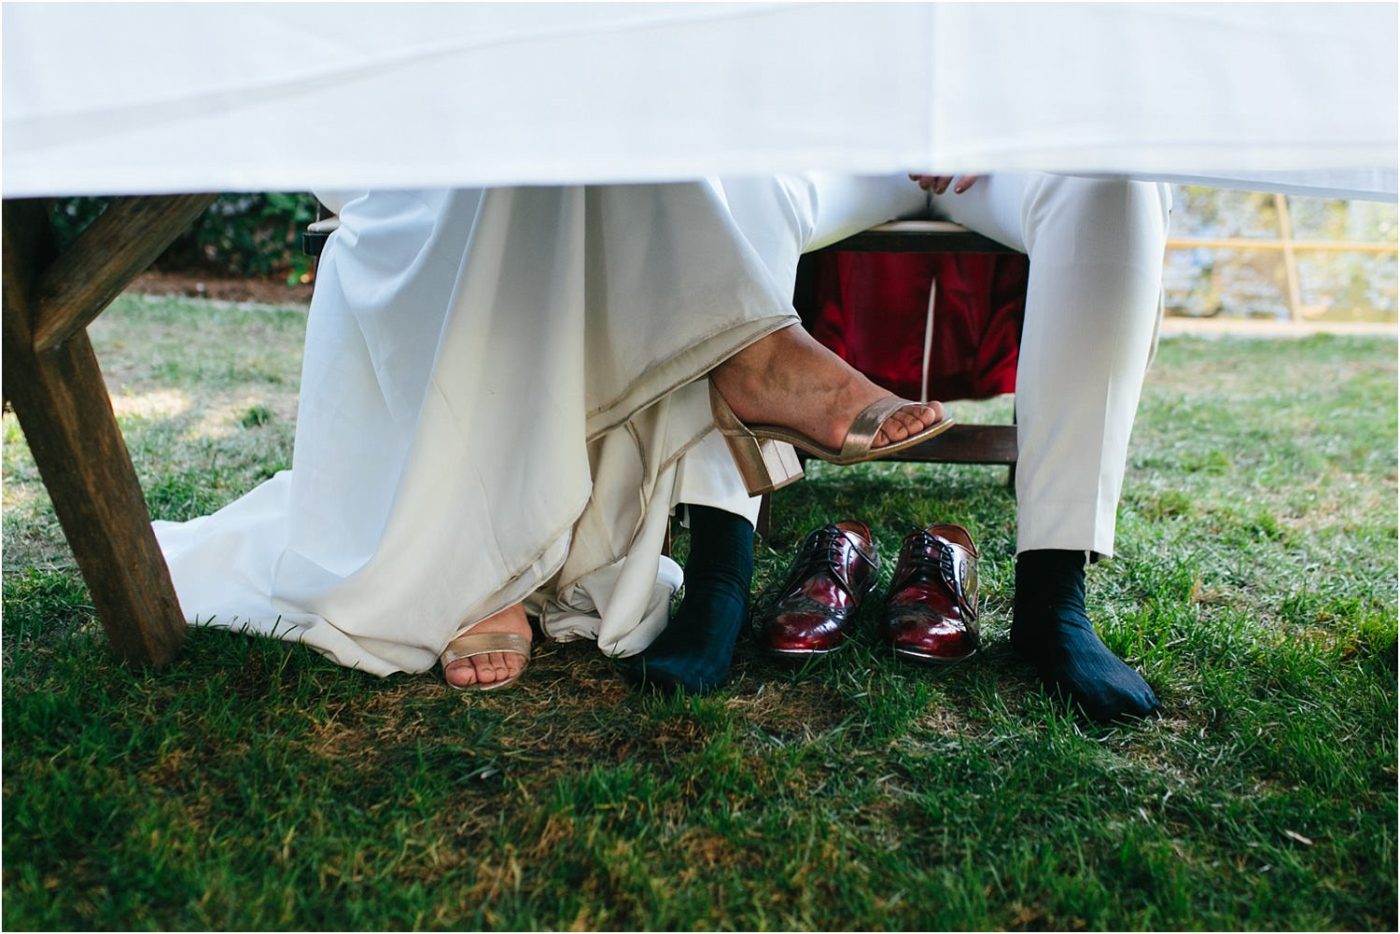 LJM Photography Destination Wedding Documentary photographer LBGTQI brides not wearing shoes from Shoe Game